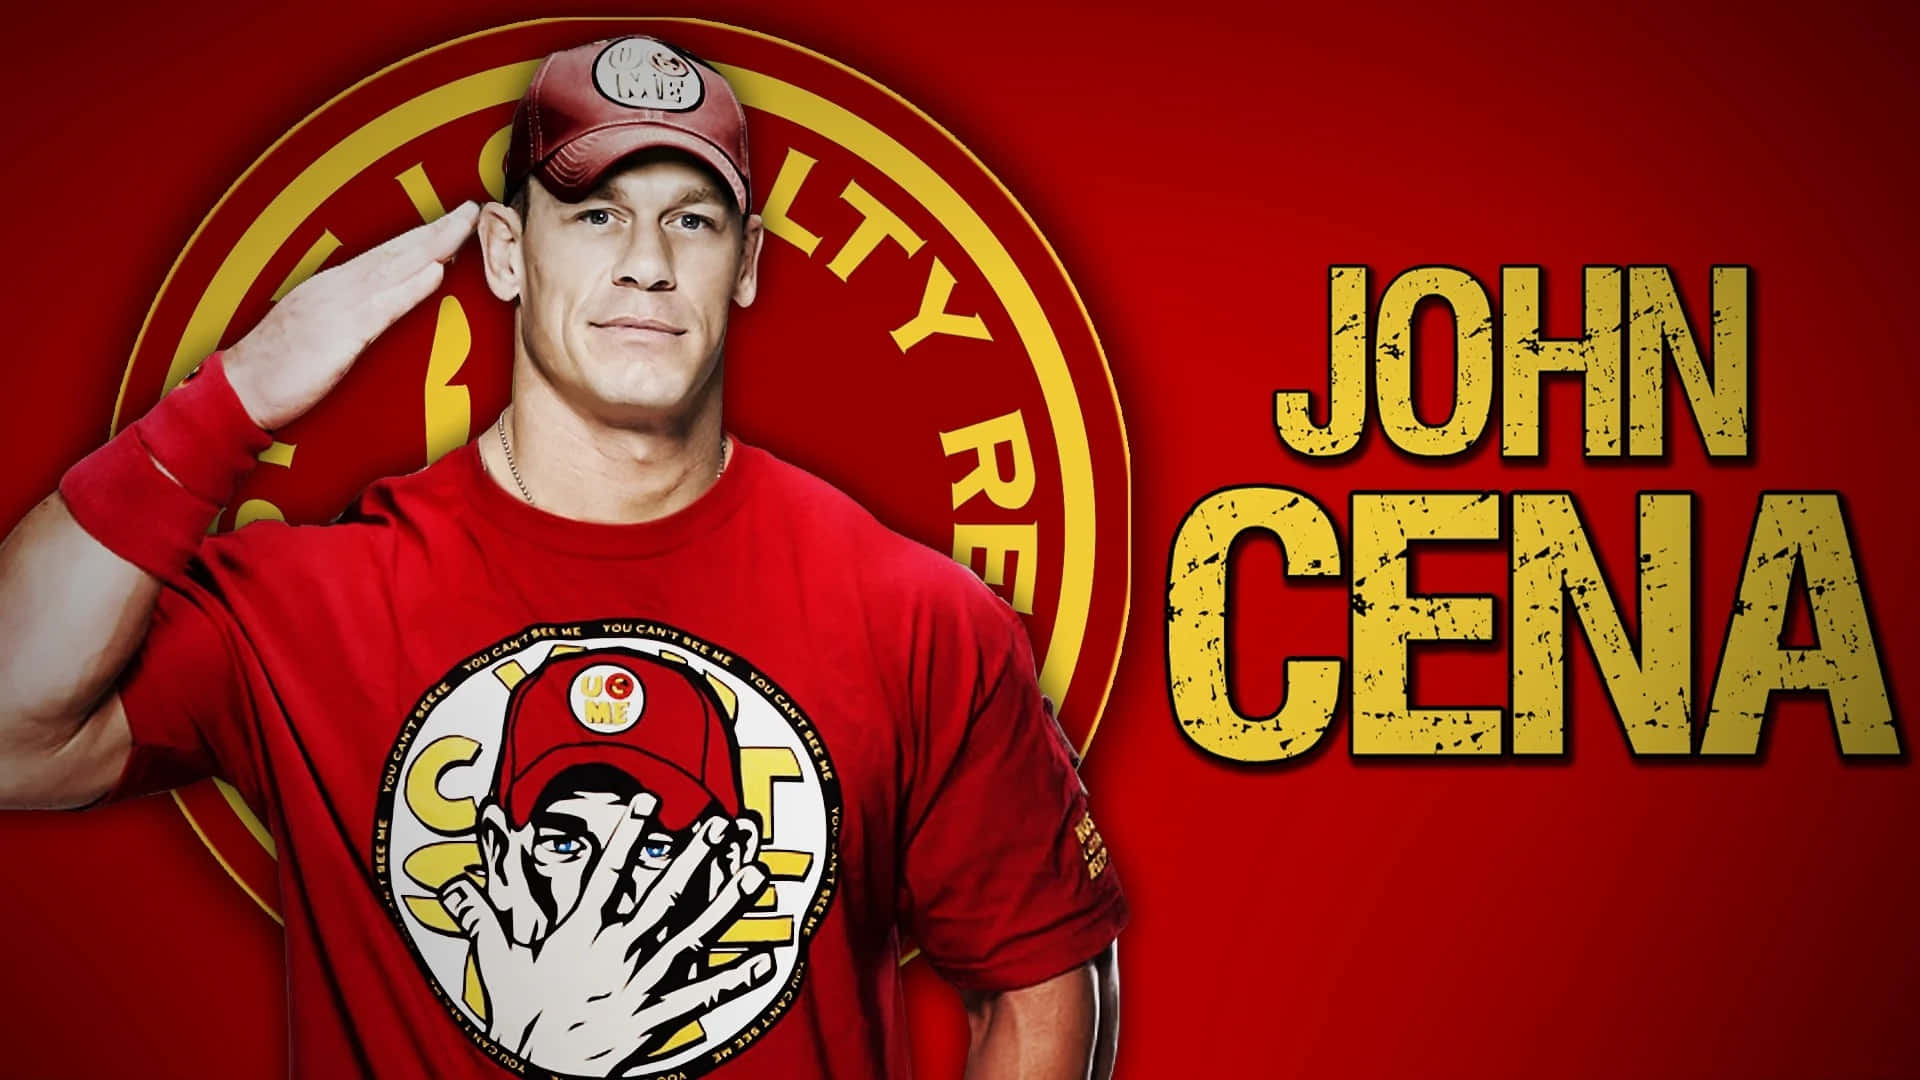 Tri-Cities 12-year-old with cerebral palsy meets his hero, John Cena